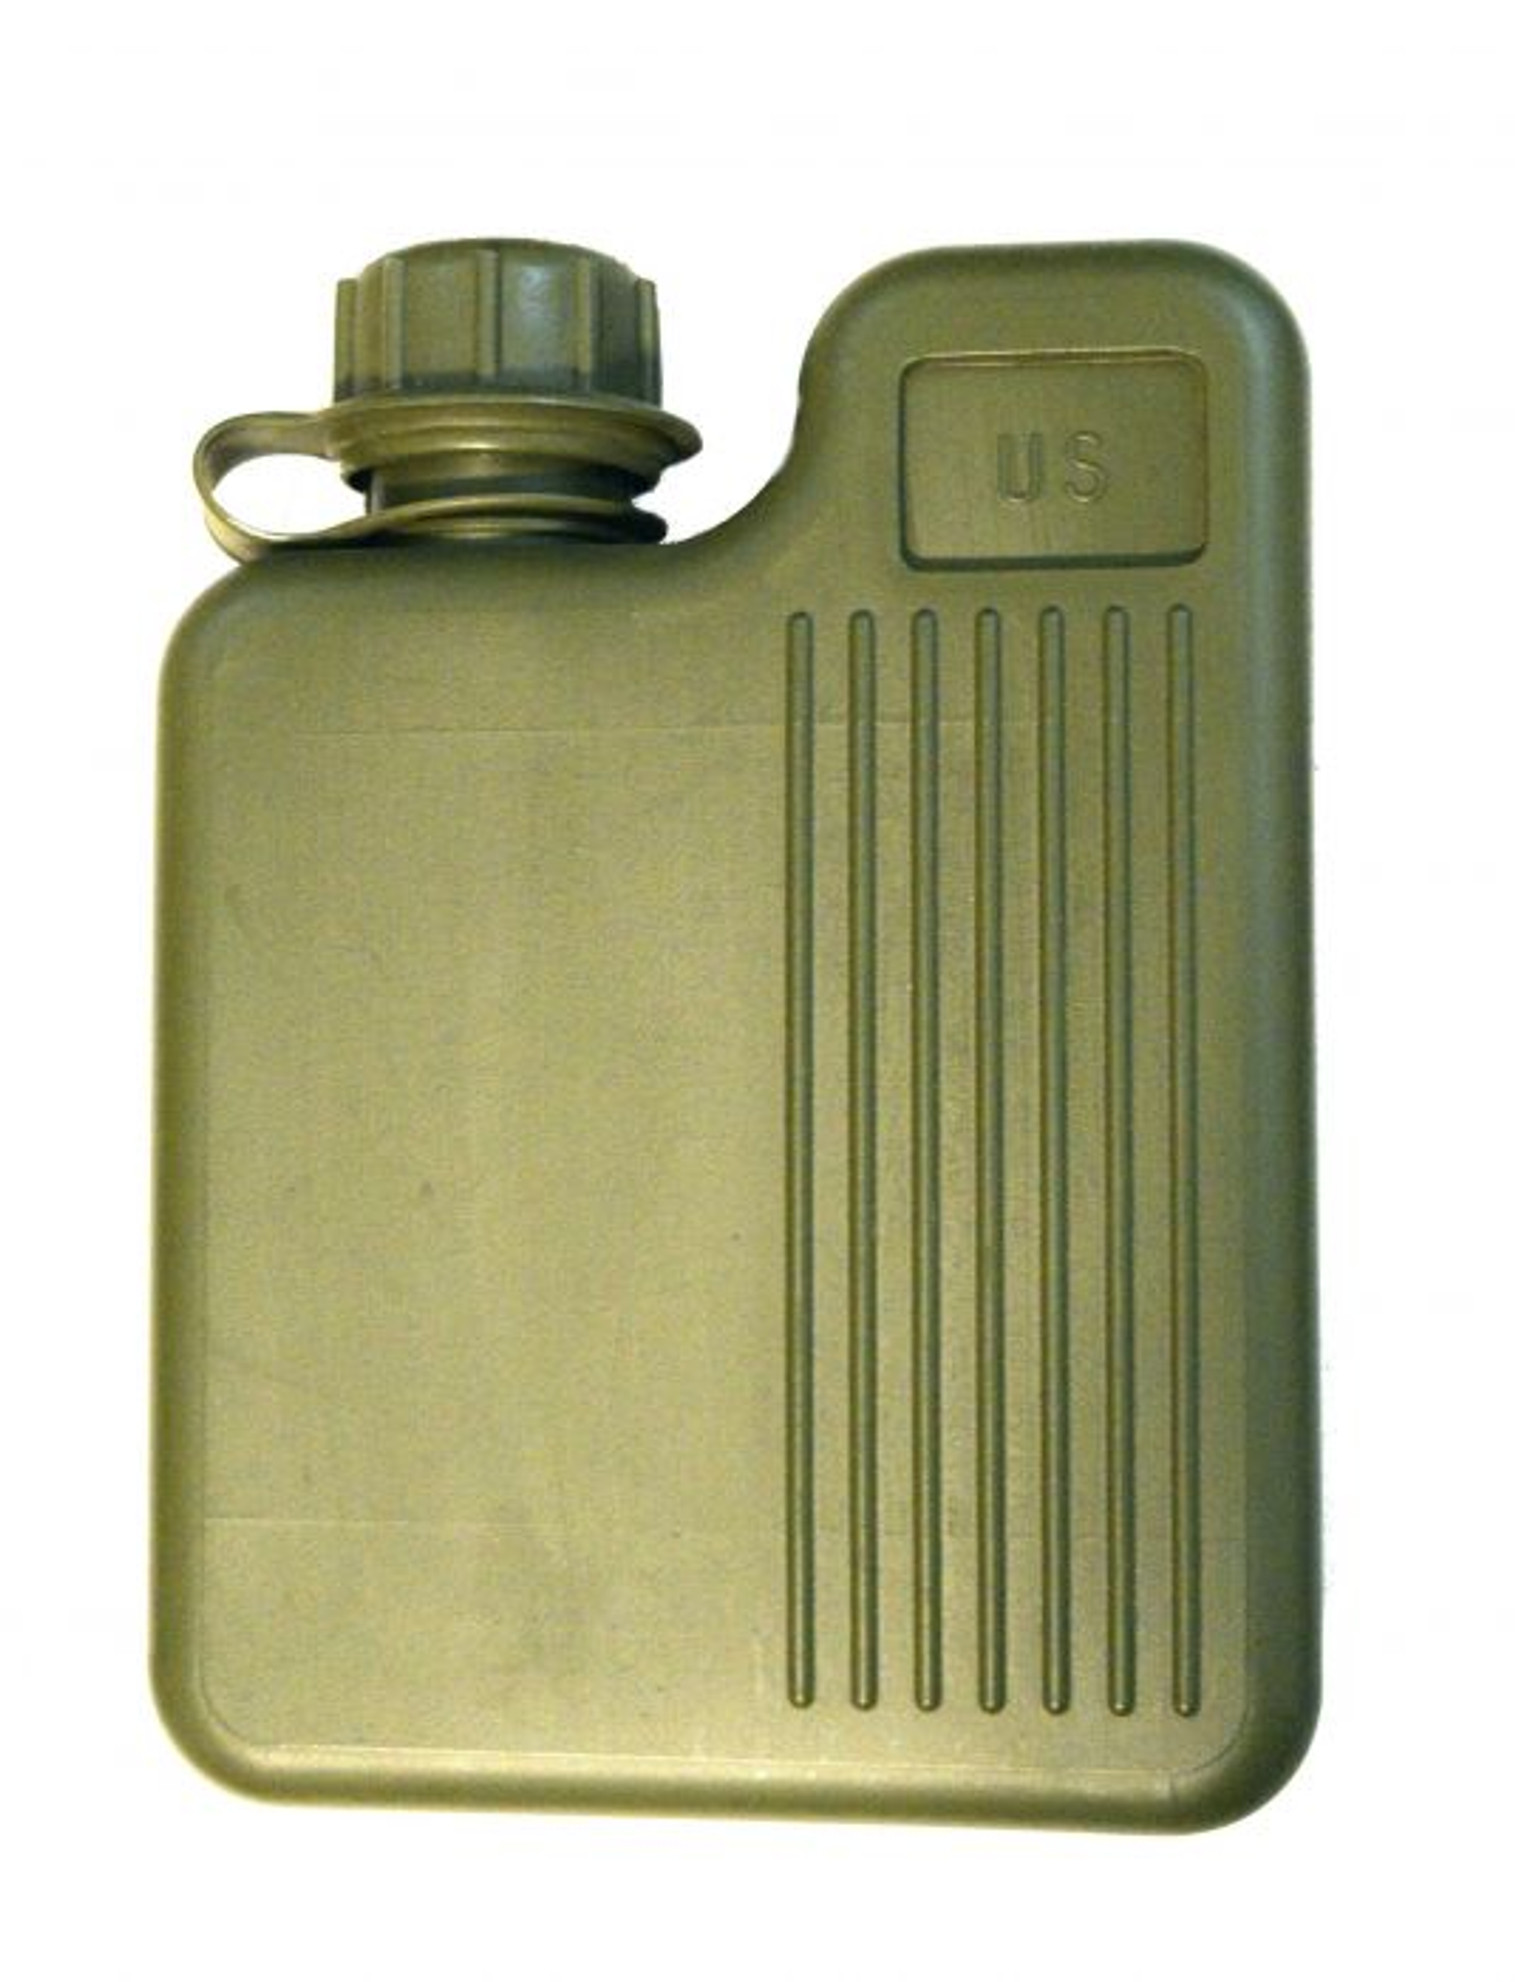 U.S. Armed Forces 1 Quart Canteen Square 